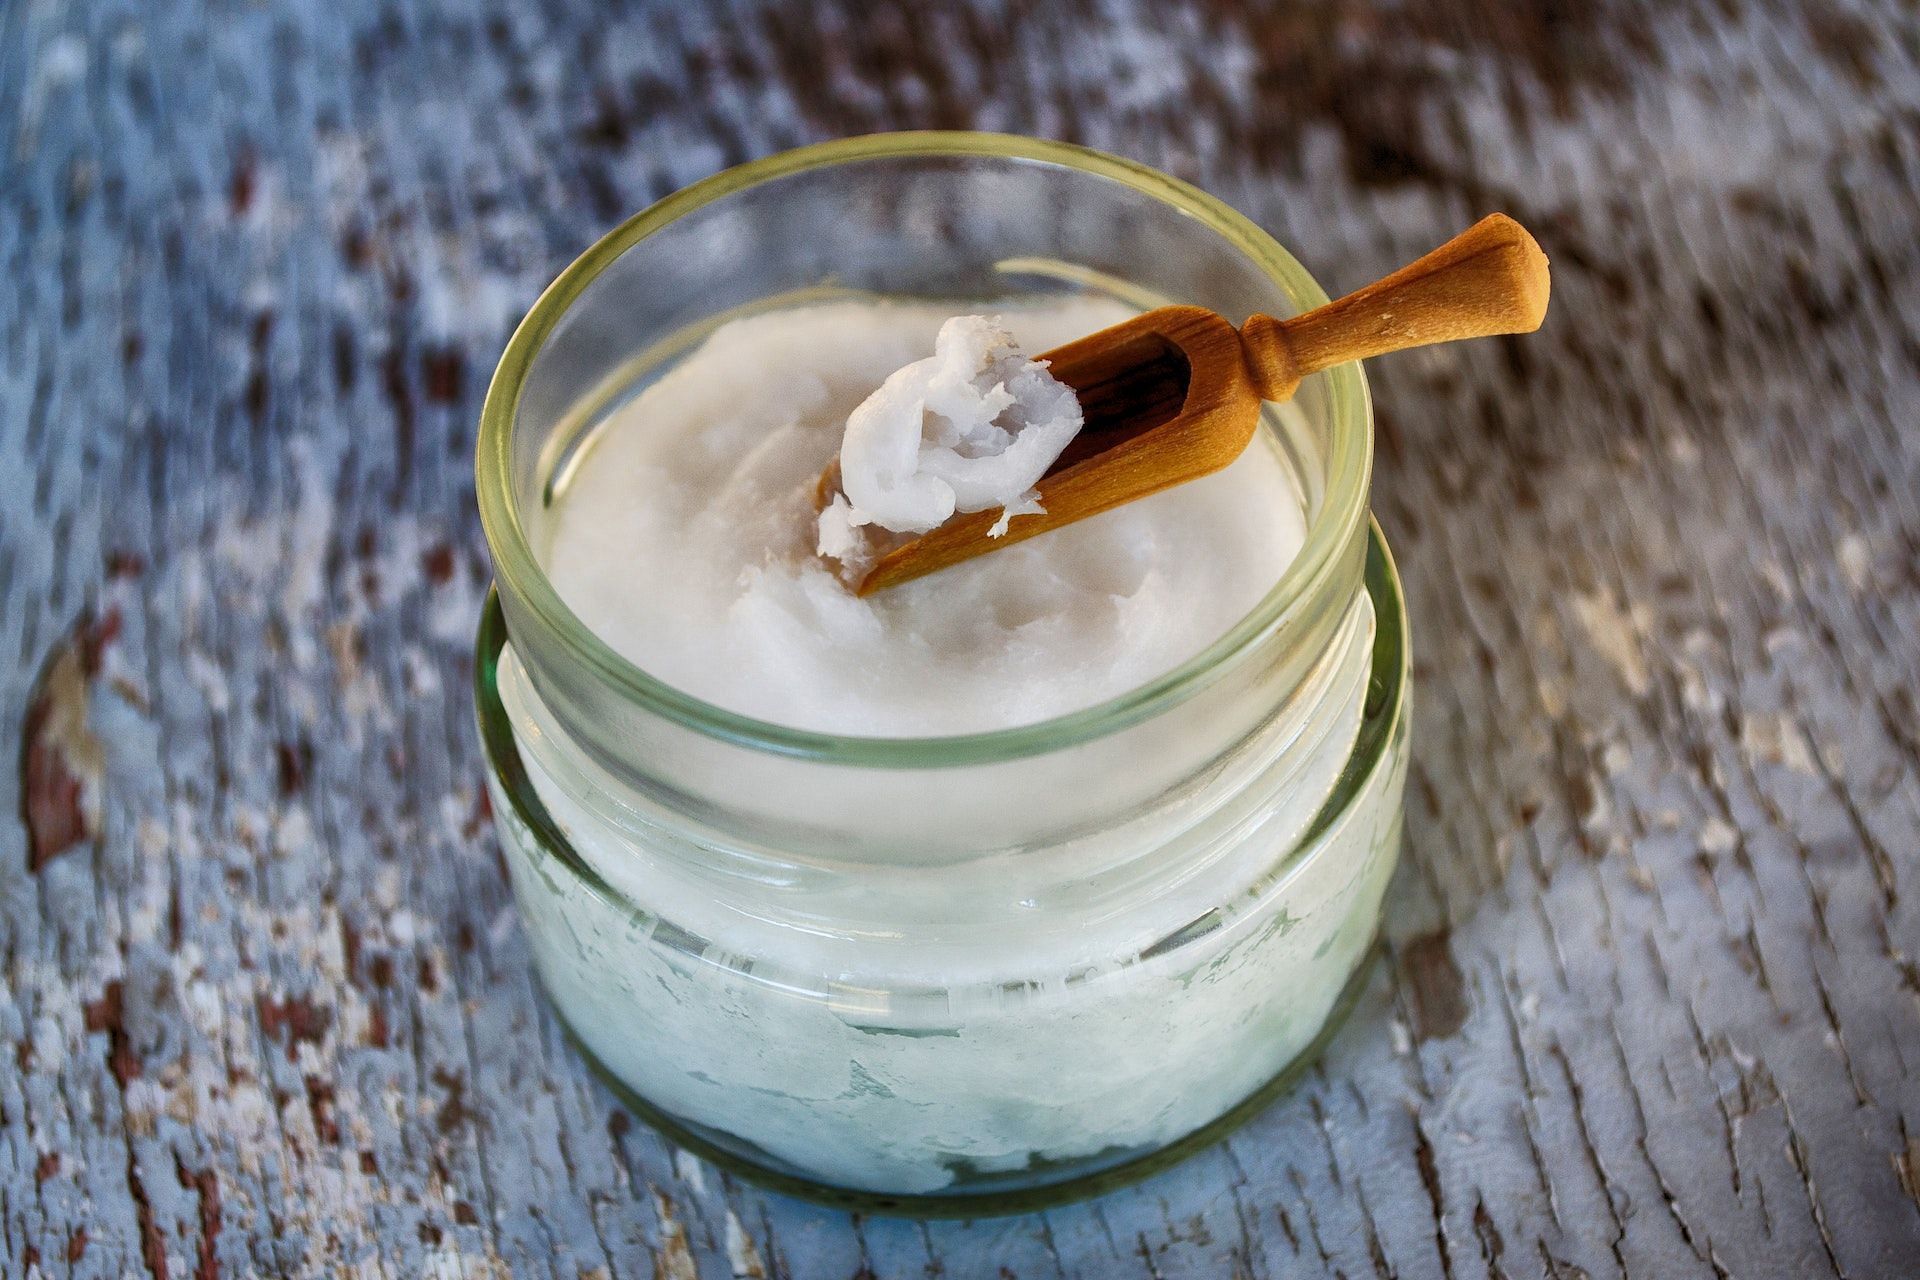 Coconut oil can be used as one of the best pinworms treatment options. (Photo via Pexels/Dana Tentis)